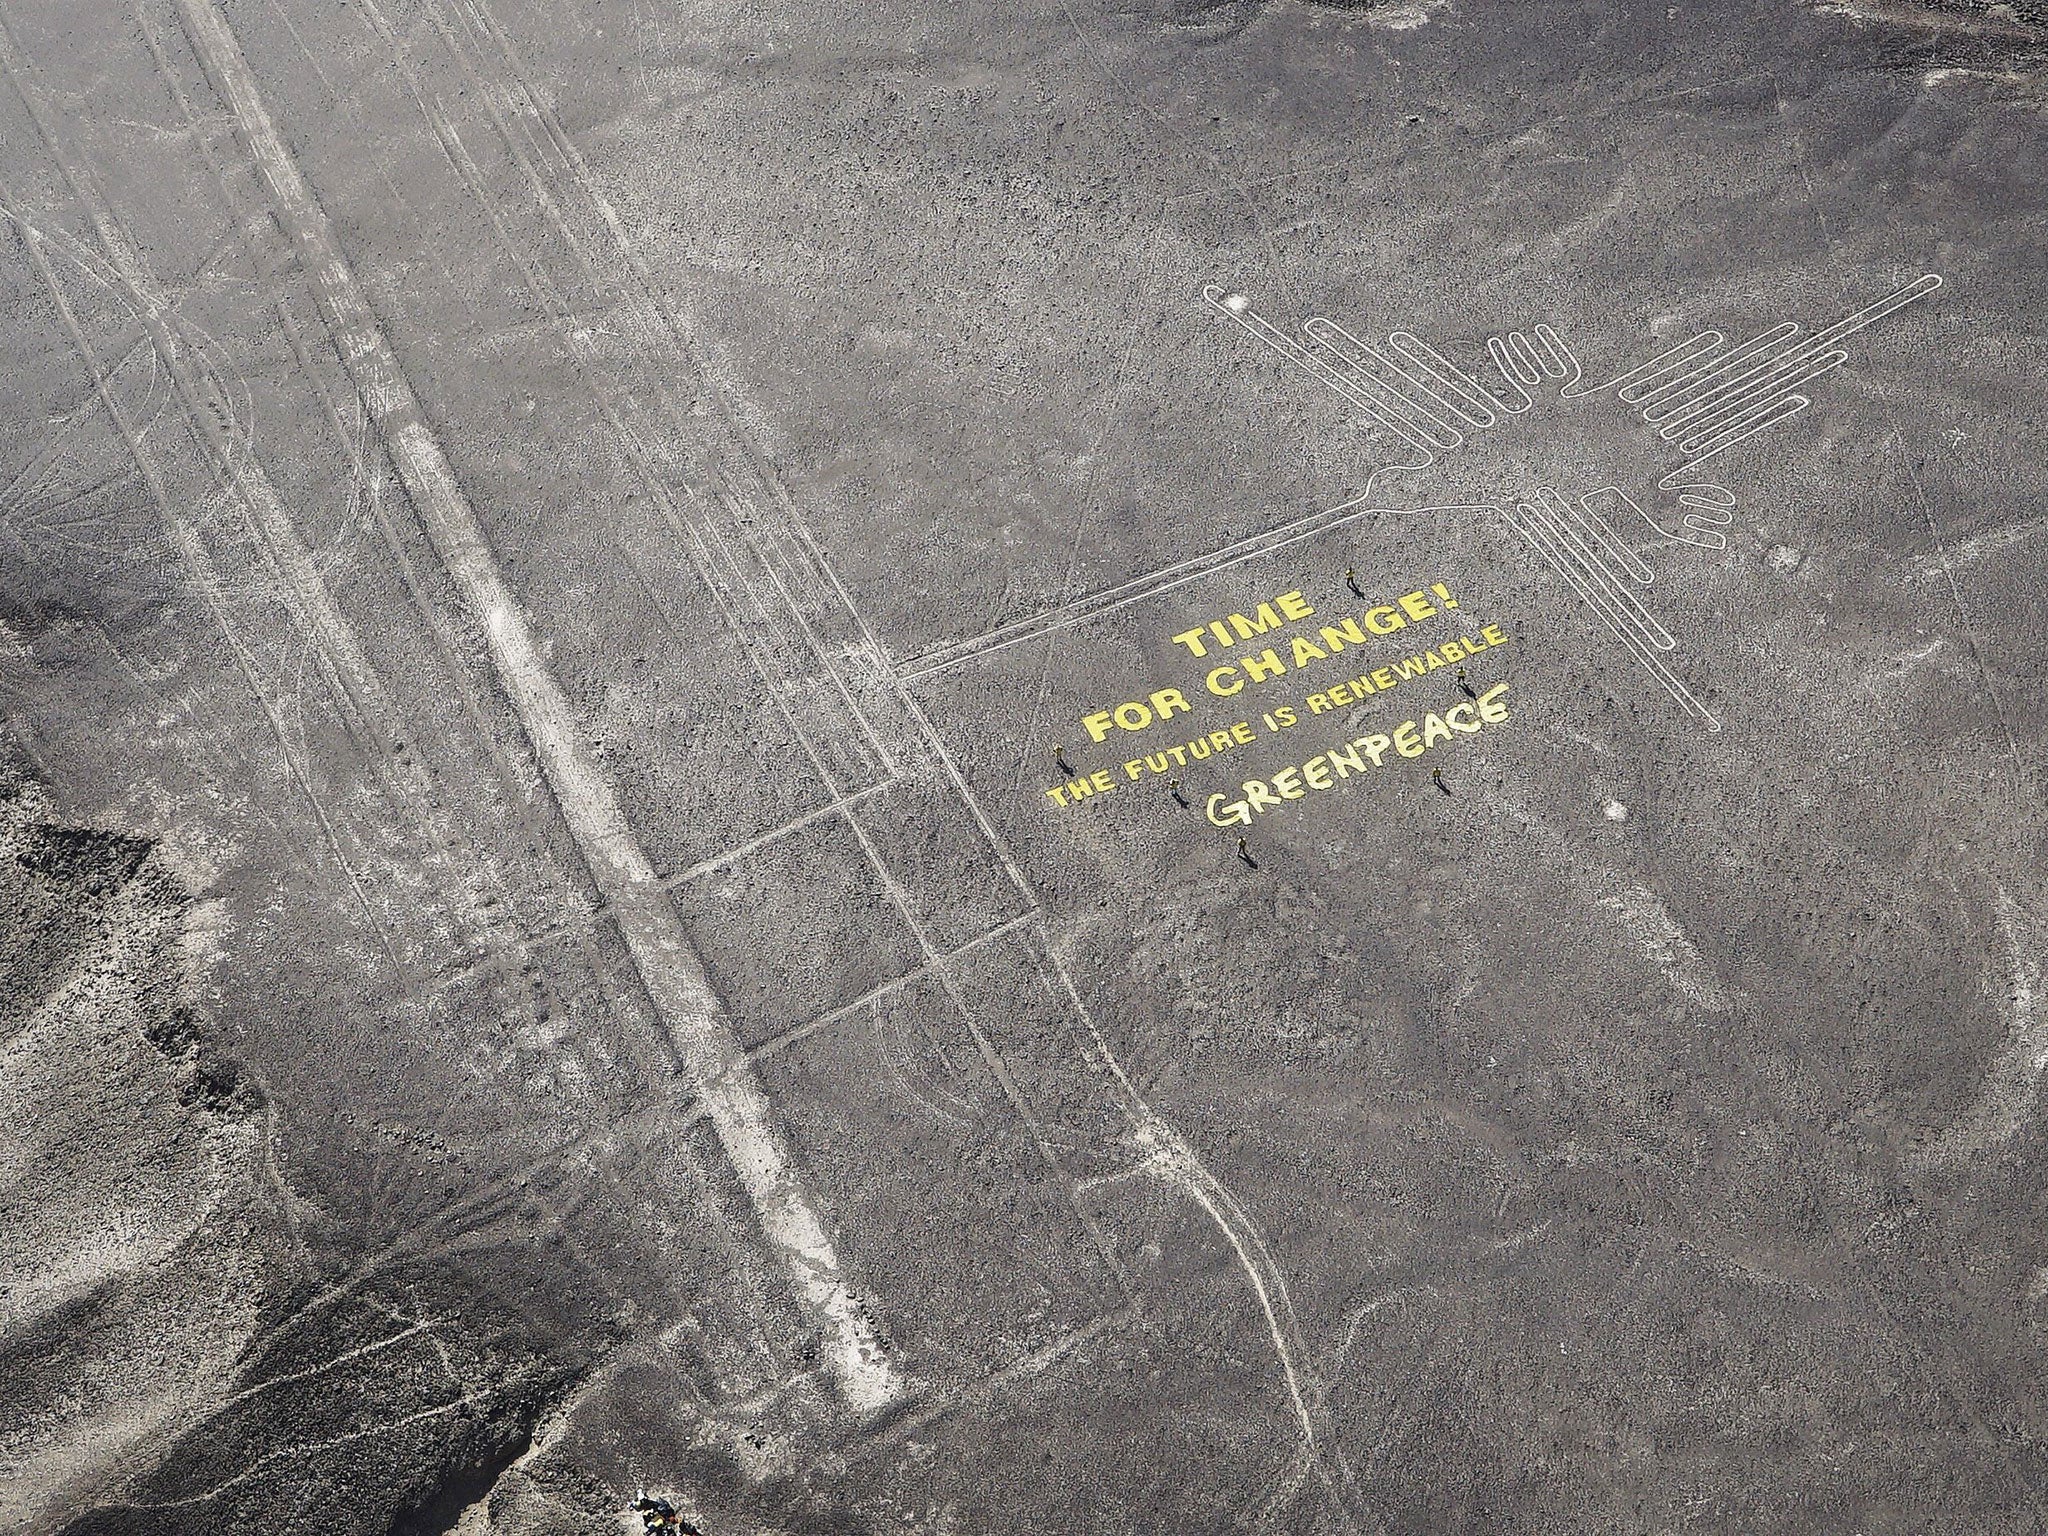 A climate change banner is seen beside the historic Nazca lines located on a stretch of coastal desert in Peru